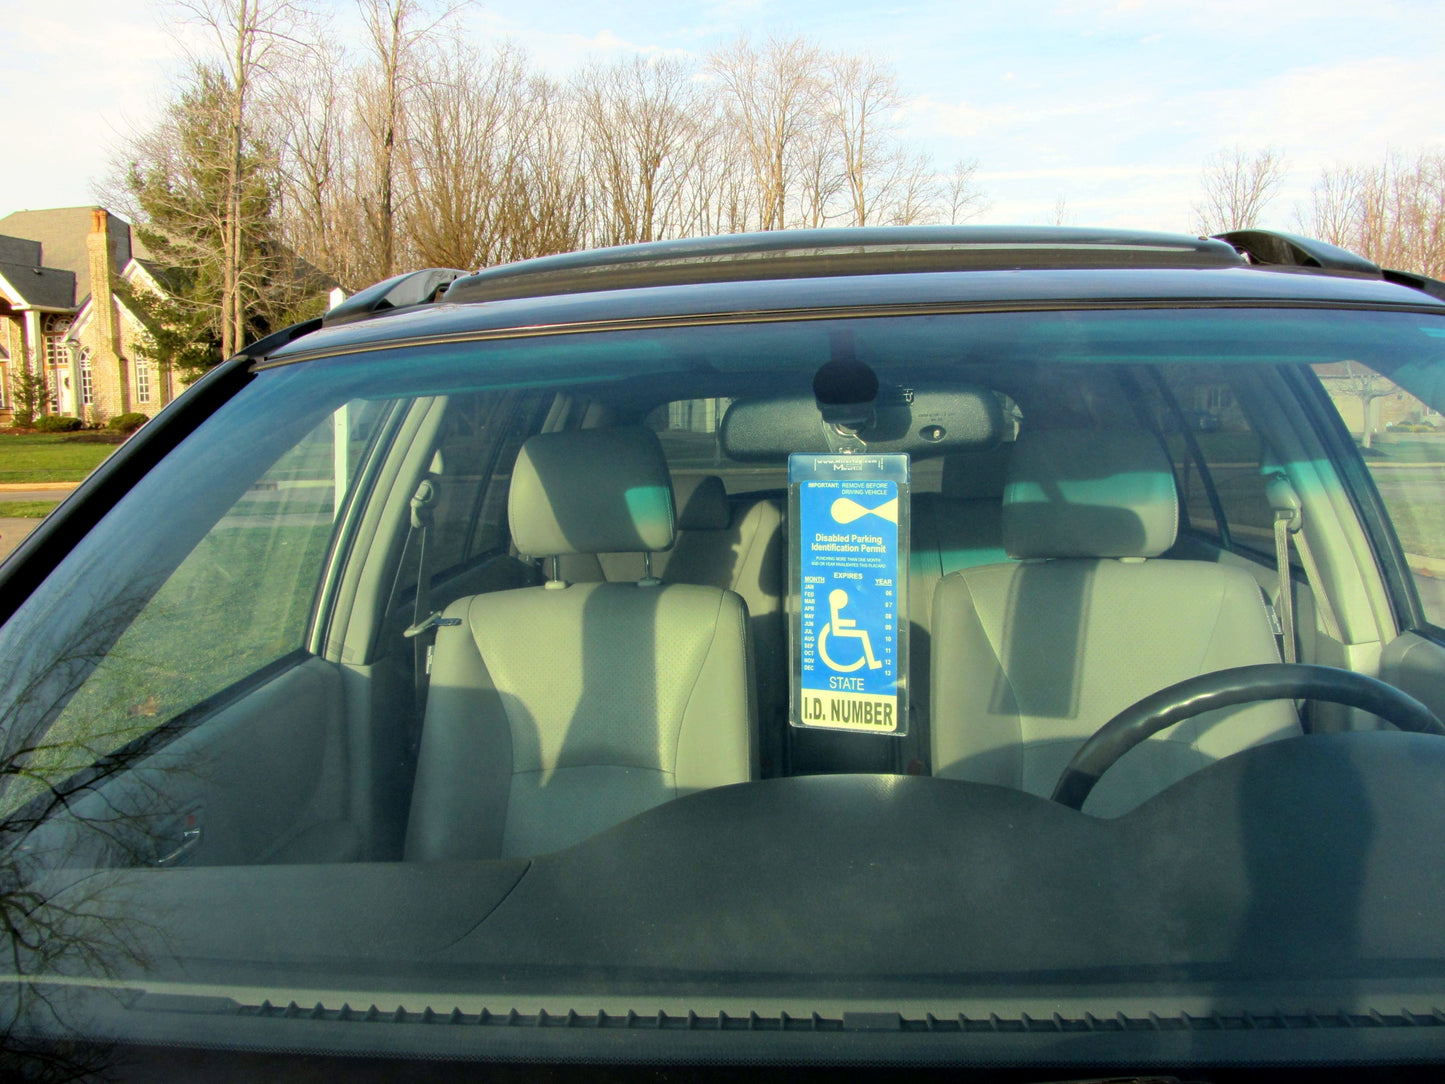 MirorTag Silver™- Handicapped Parking Placard Holder & Protector. Magnetically Display & Store Away your Tag. Placard size 10in x 4in. Made in USA